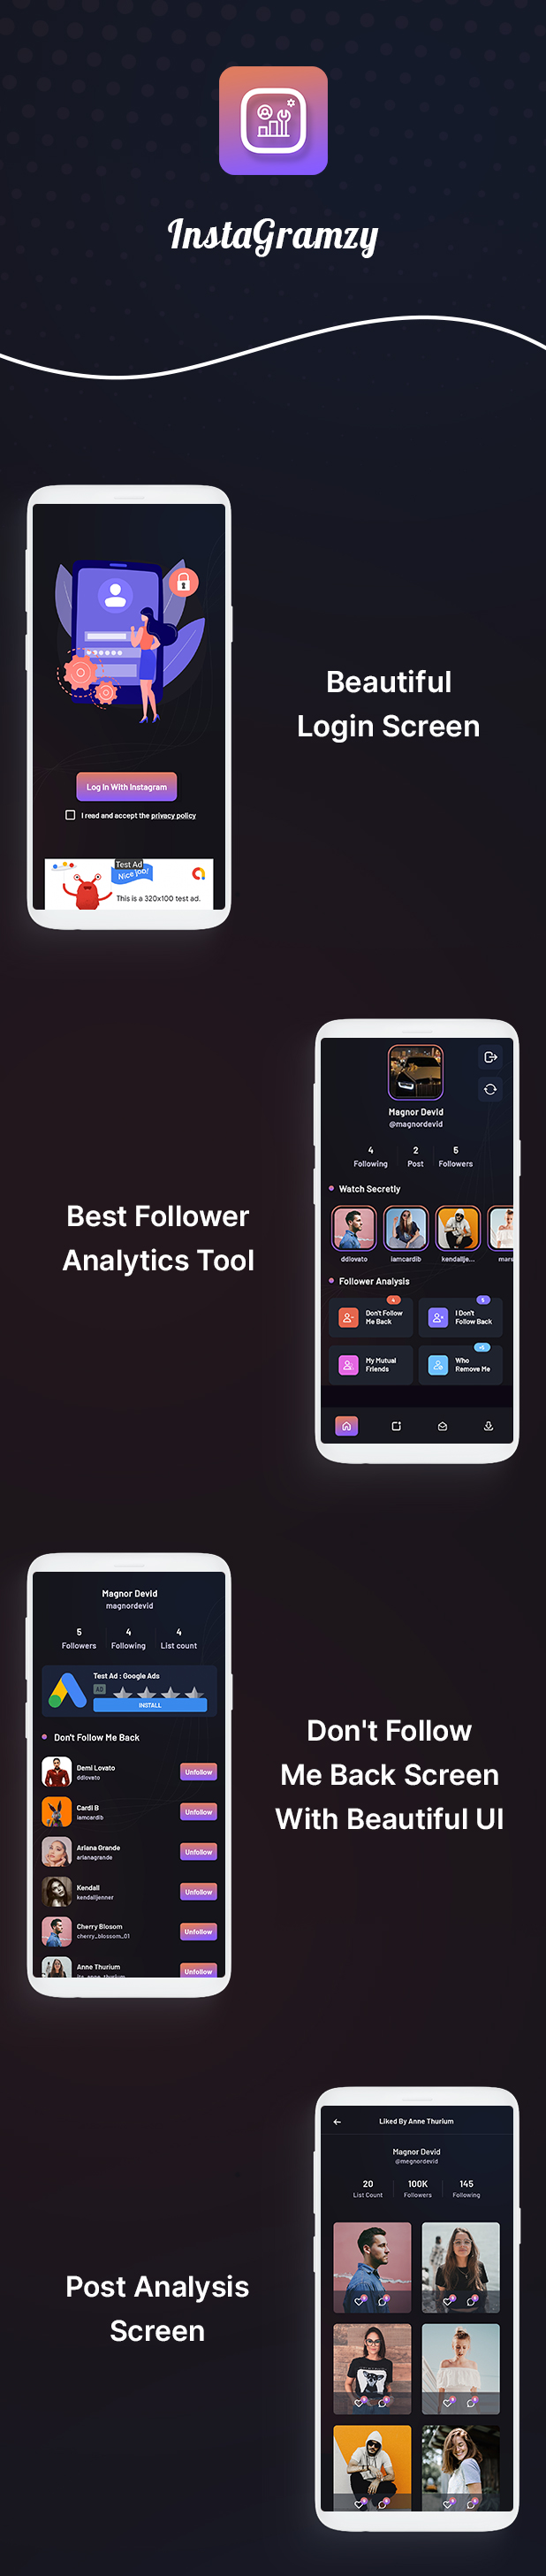 InstaGramzy - All in one Instagram toolkit with Followers Analytics - 6